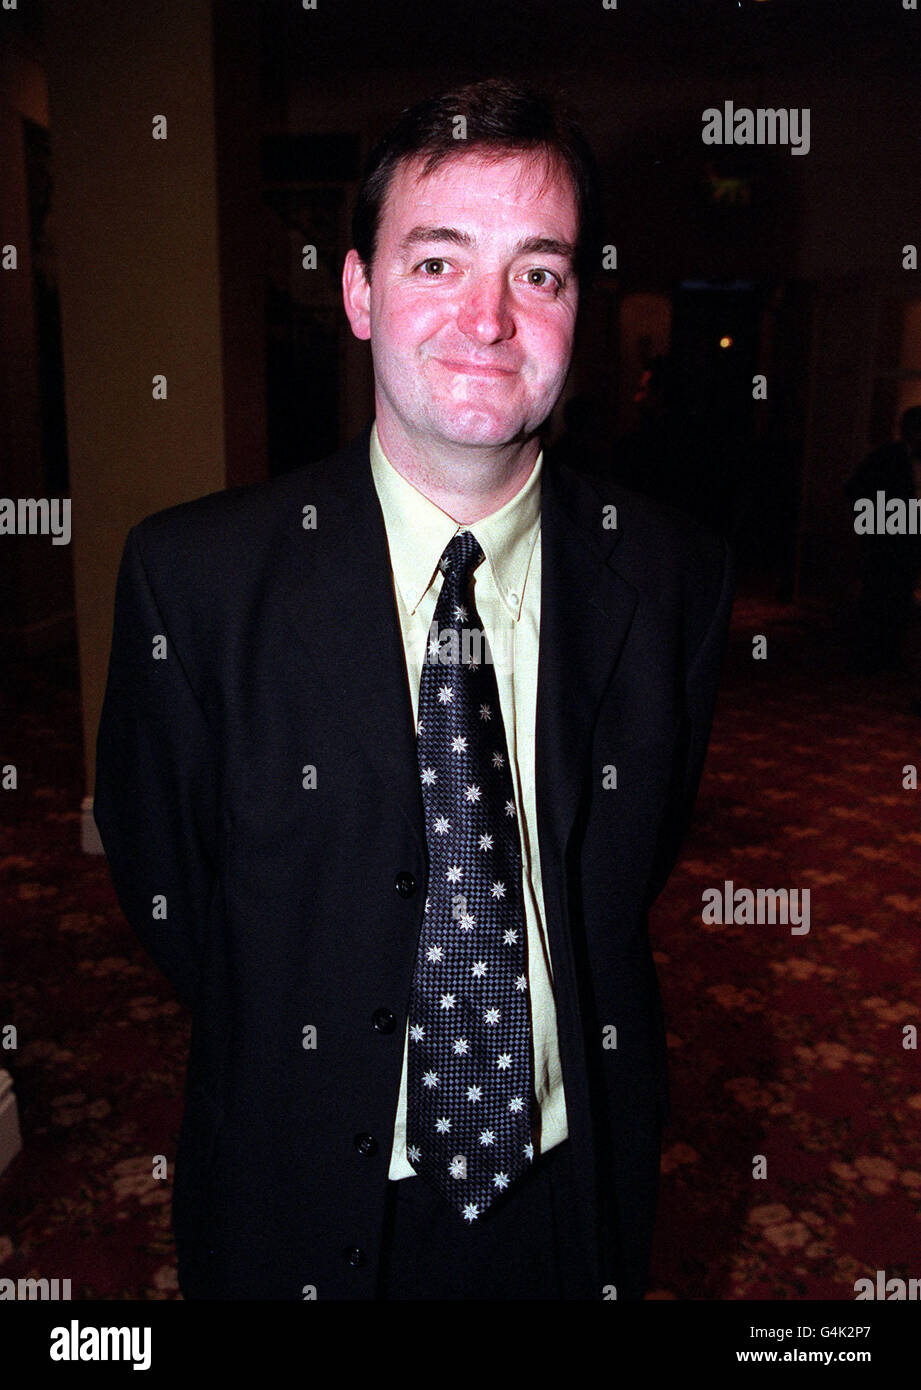 Actor Craig Cash who plays Malcom in the BBC 1 Comedy Mrs Merton and Malcom, at London's Royal Lancaster Hotel for the 95.8 Capital FM 1999 London Awards lunch. Stock Photo